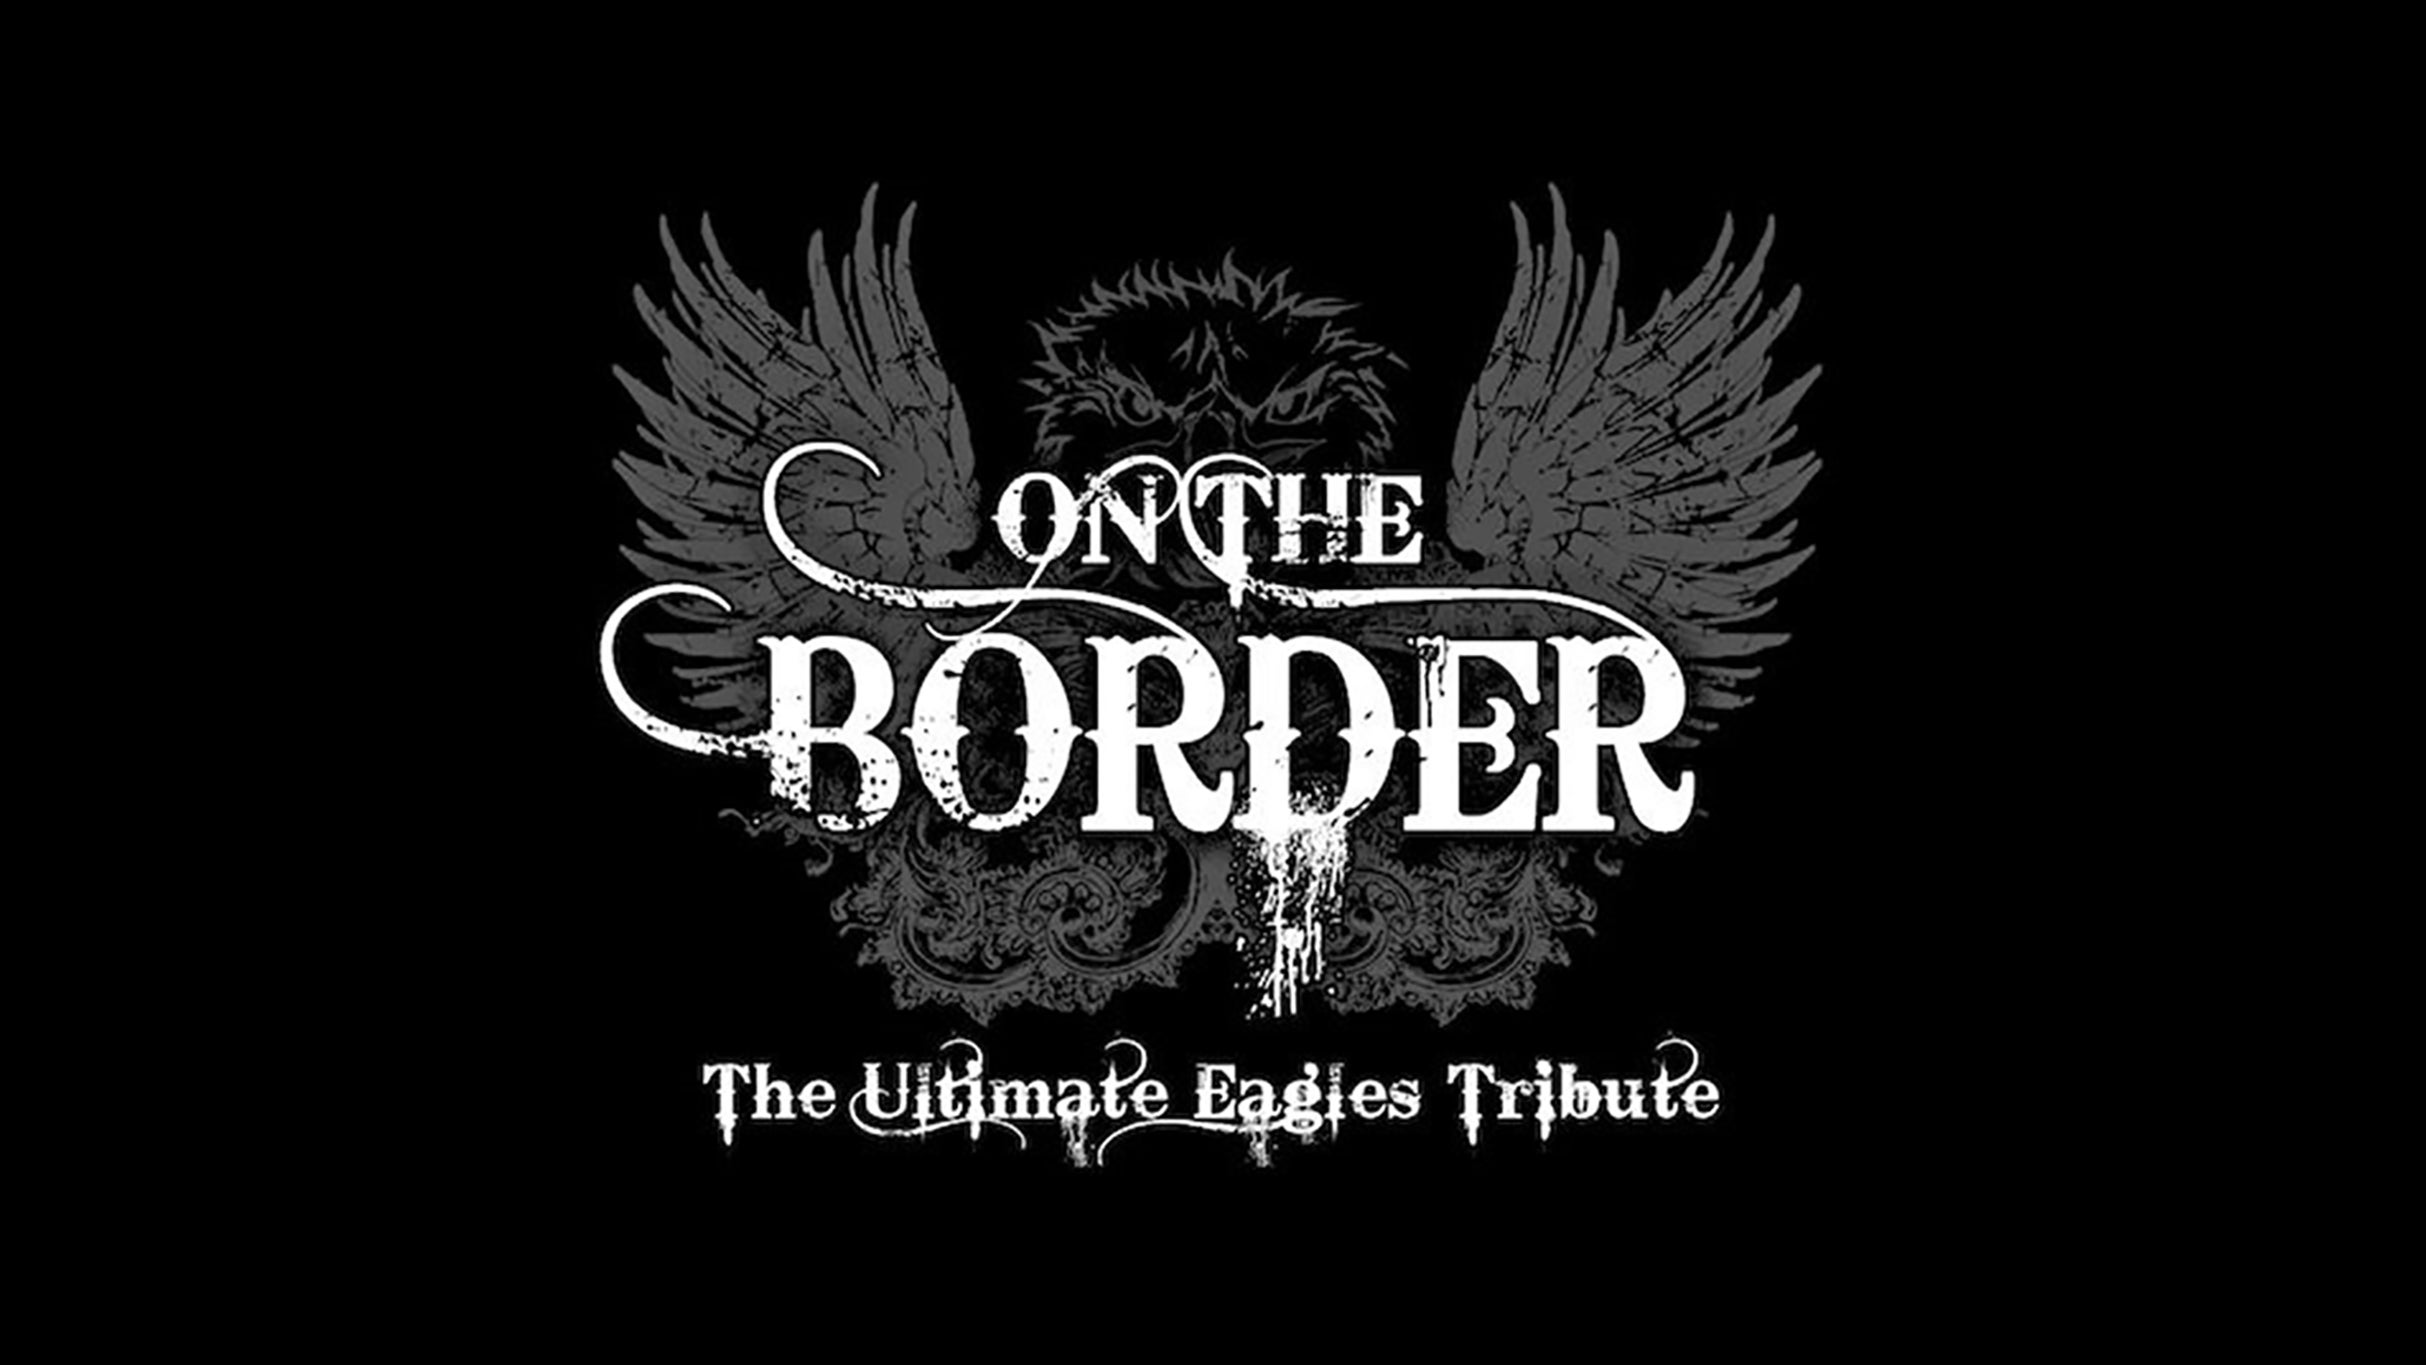 On the Border: The Ultimate Eagles Tribute at Elevation 27